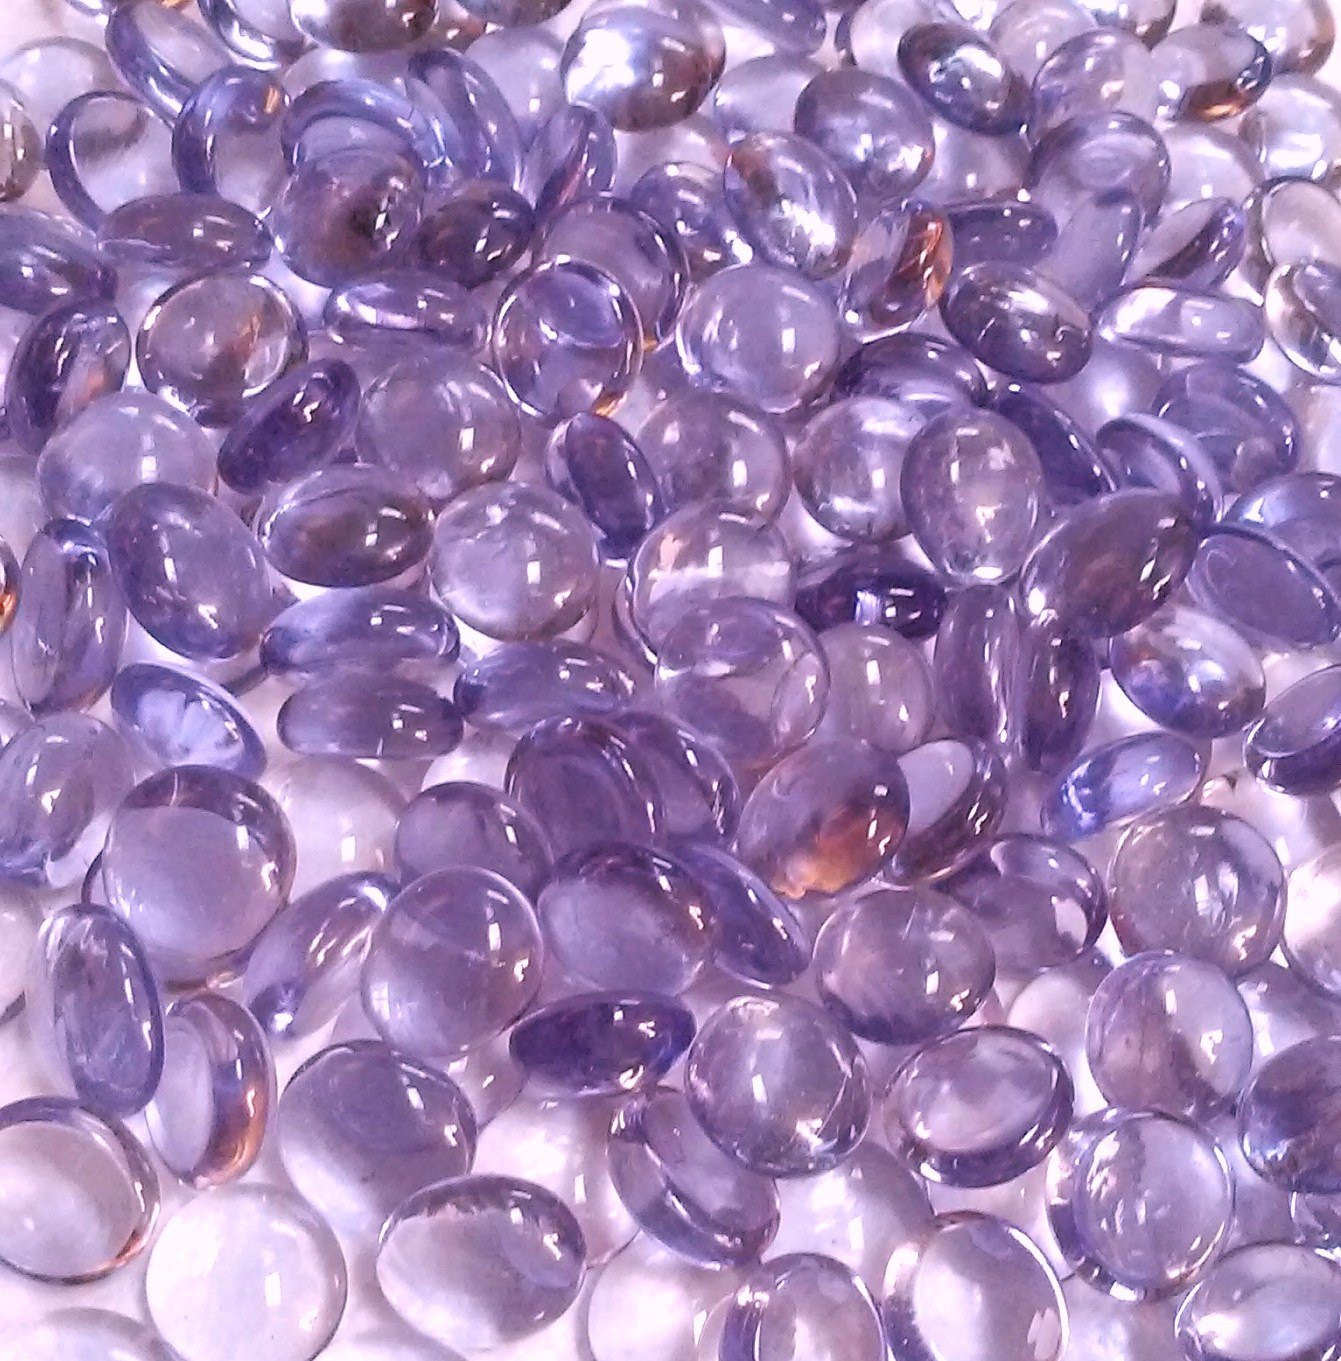 purple glass gems for vases of 100 lilac glass gems stones mosaic pebbles centerpiece flat etsy within dpowiaksz